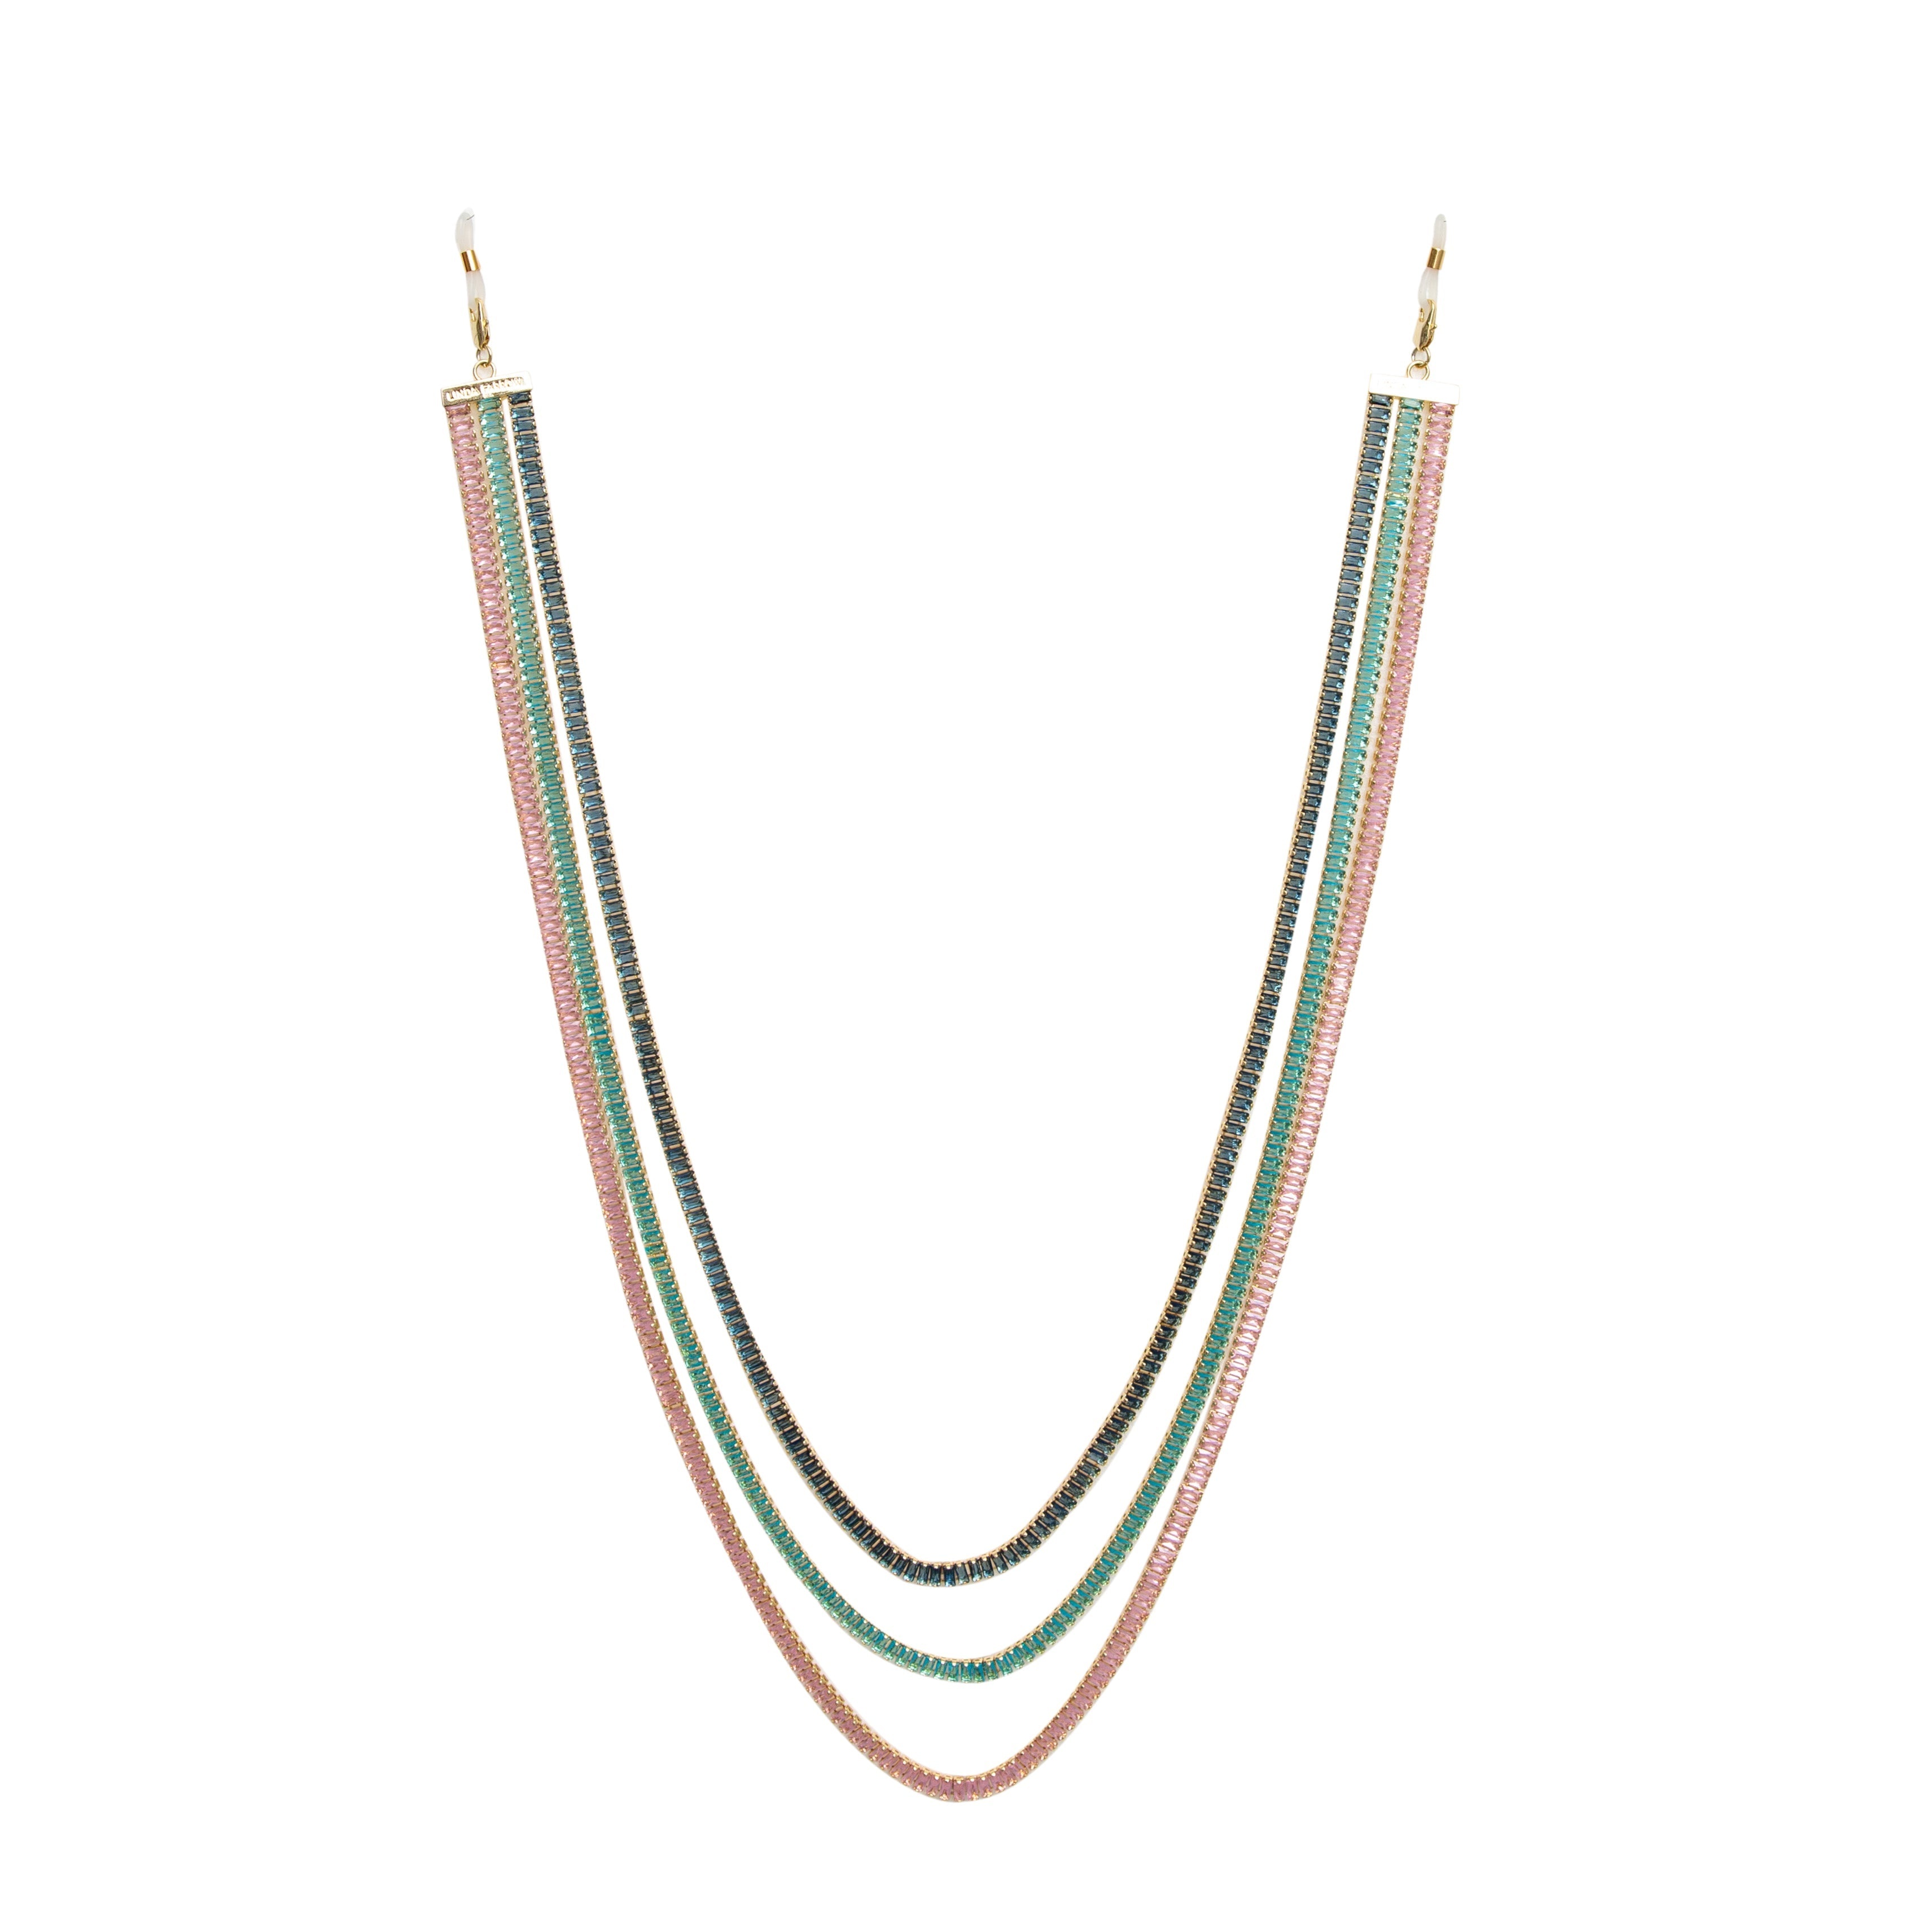 LINDA FARROW CRYSTAL CHAIN IN PINK GREEN AND BLUE - 1